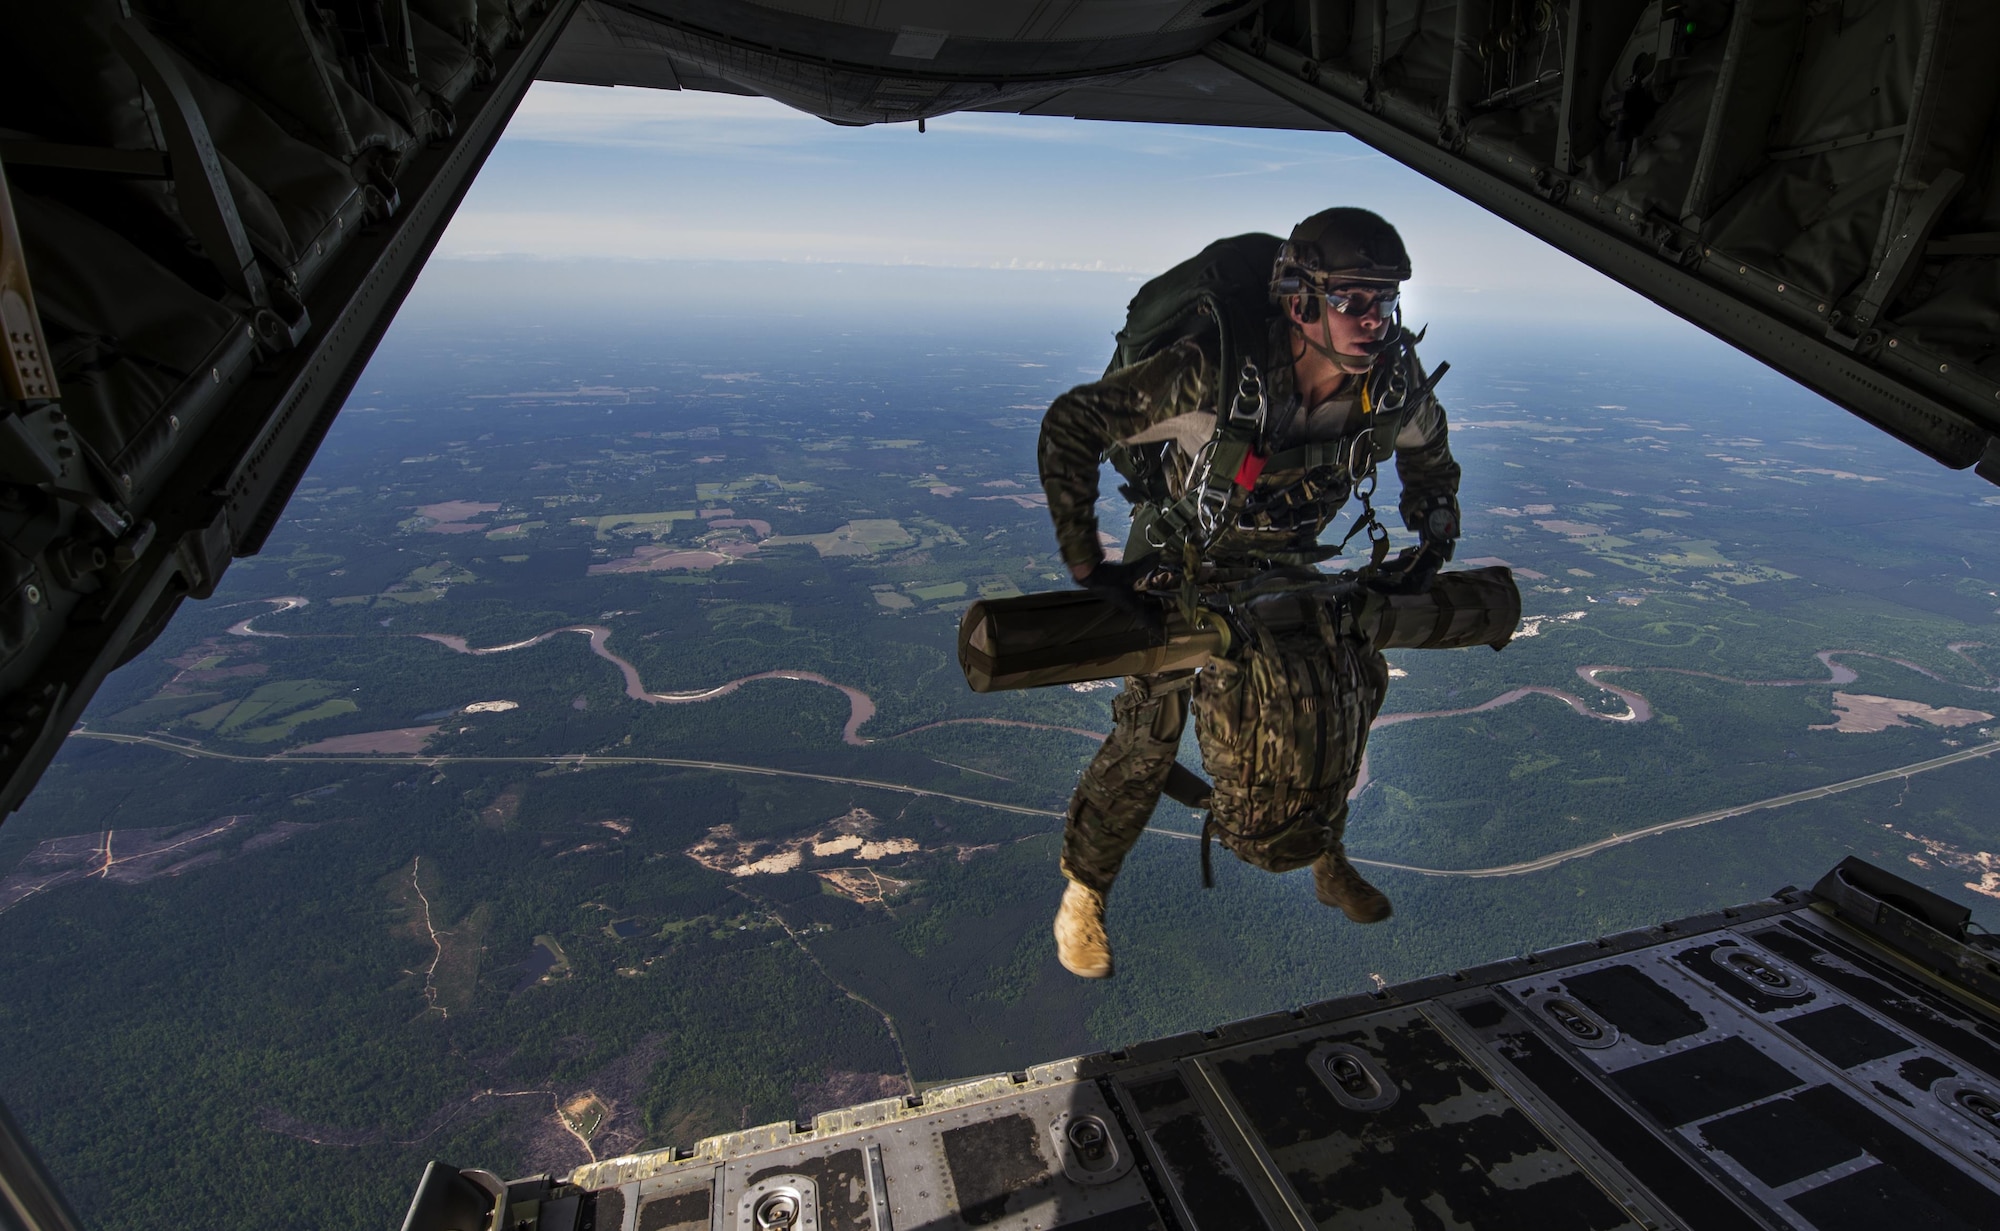 A U.S. Air Force combat controller jumps out of an MC-130J Combat Shadow II during Emerald Warrior 2015 at Hurlburt Field, Fla., April 22, 2015. Emerald Warrior is the Department of Defense's only irregular warfare exercise, allowing joint and combined partners to train together and prepare for real-world contingency operations. (U.S. Air Force photo by Staff Sgt. Douglas Ellis/Released)